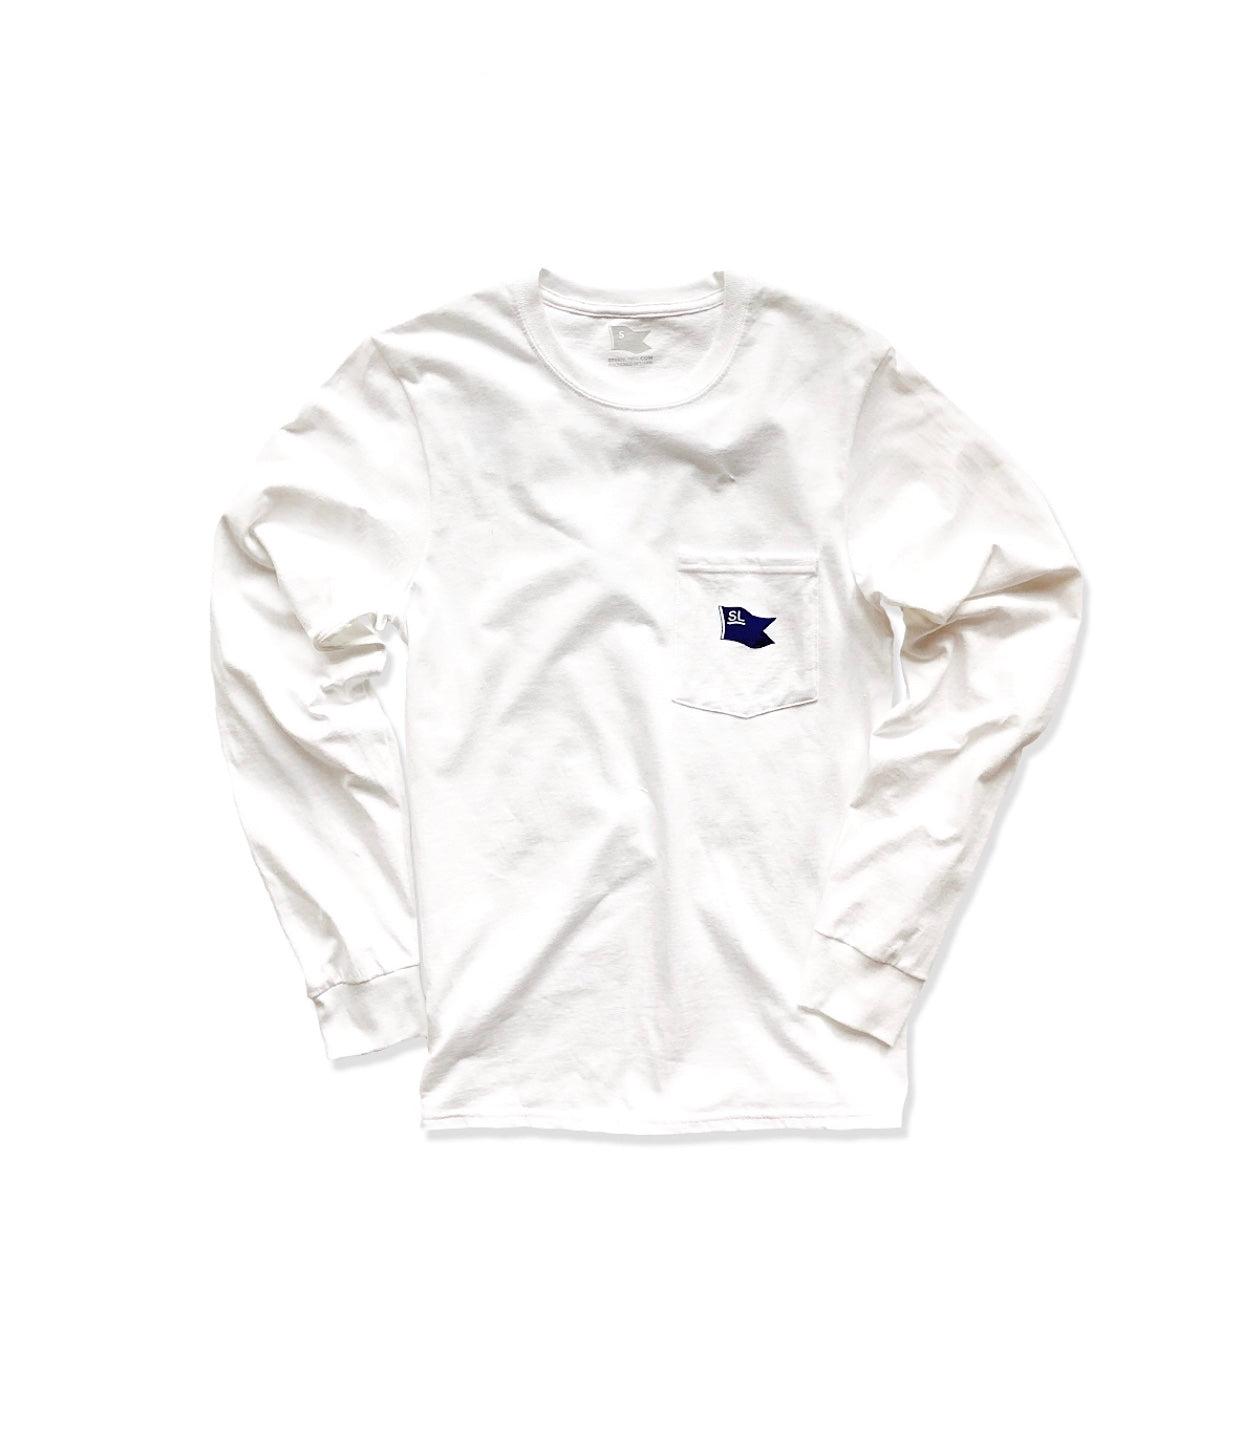 sghla Hand Aged & Distressed Pocket Tee - Off White S